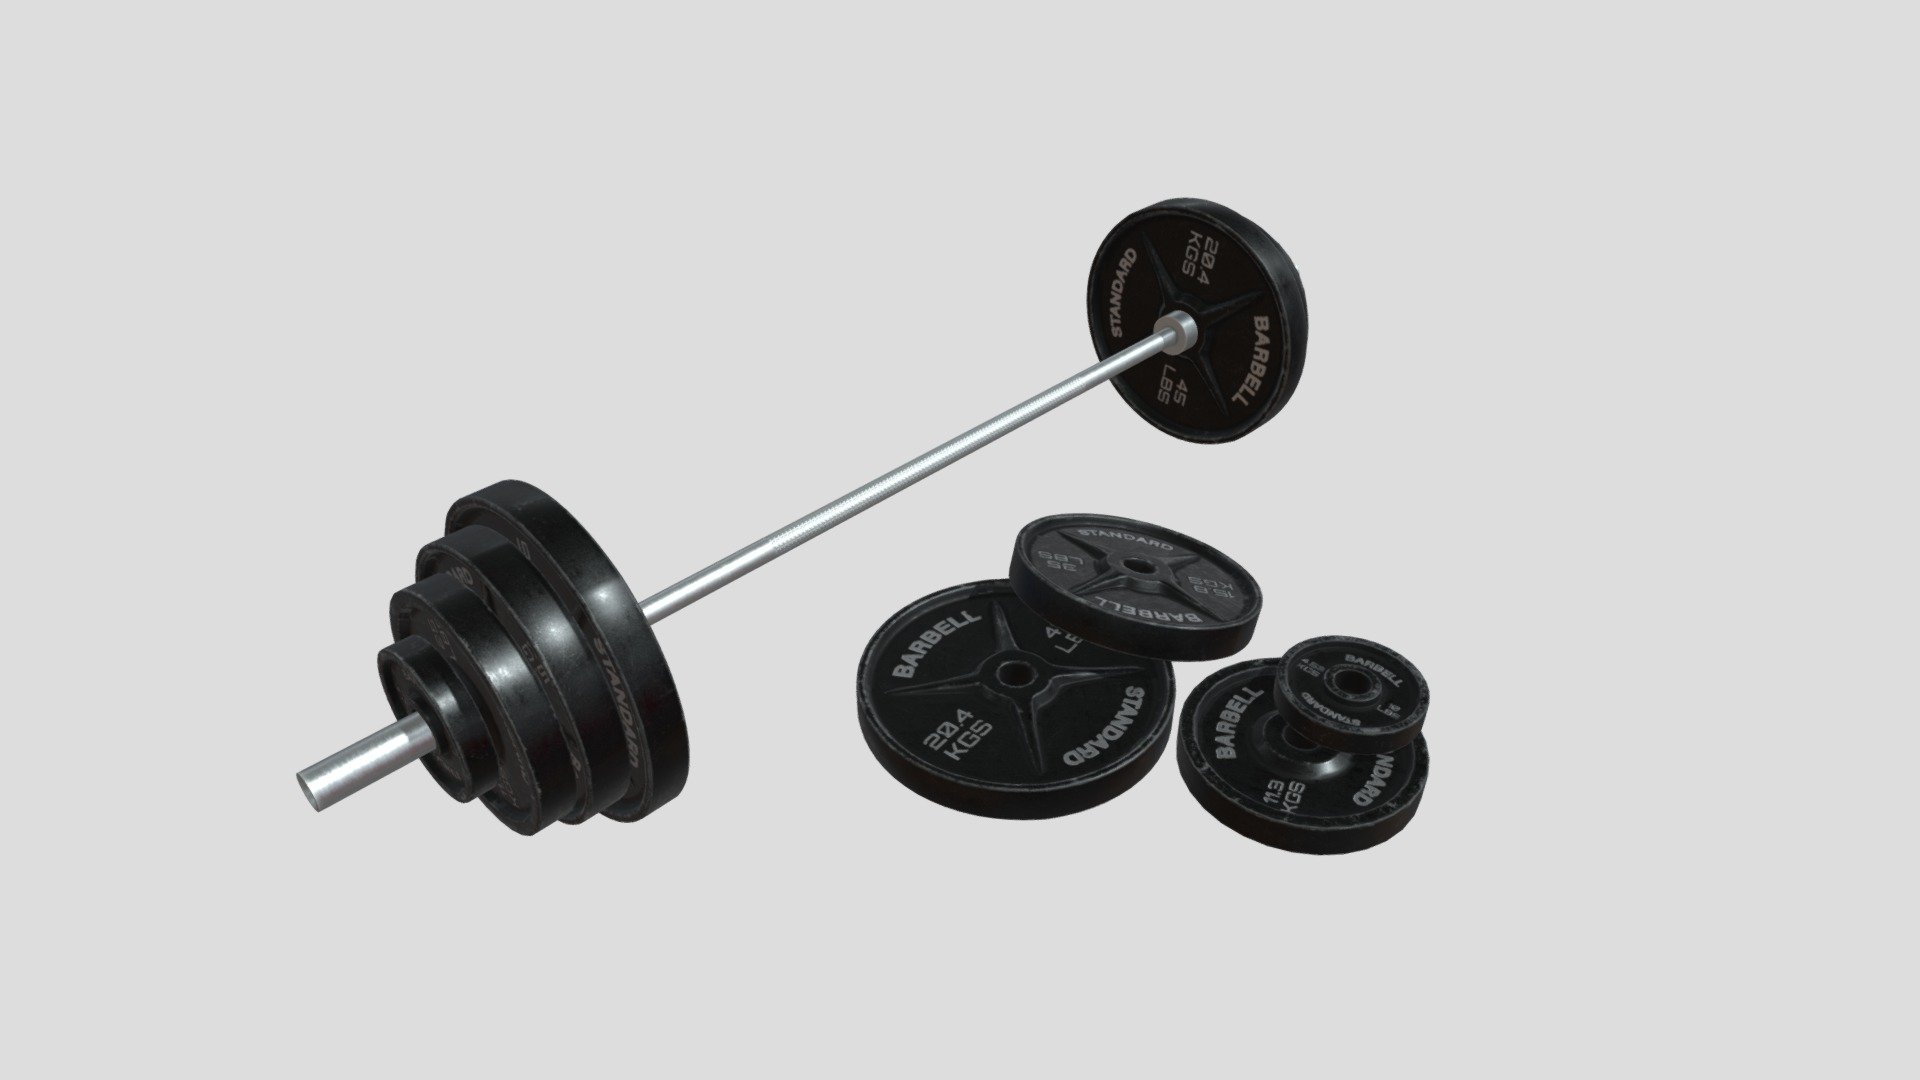 This Barbell comes with the pole and the weights and is perfect for any gym scene. each weight is an individual mesh and the model is viewable from all angles and distances.

This Includes:

The mesh (45 lb, 35 lb, 25 lb, 10 lb, Pole)
4K, 2K, 1K Texture Set (Albedo, Metallic, Roughness, Normal, Height)
The meshes are UV Unwrapped with vertex colors for easy retexturing 3d model